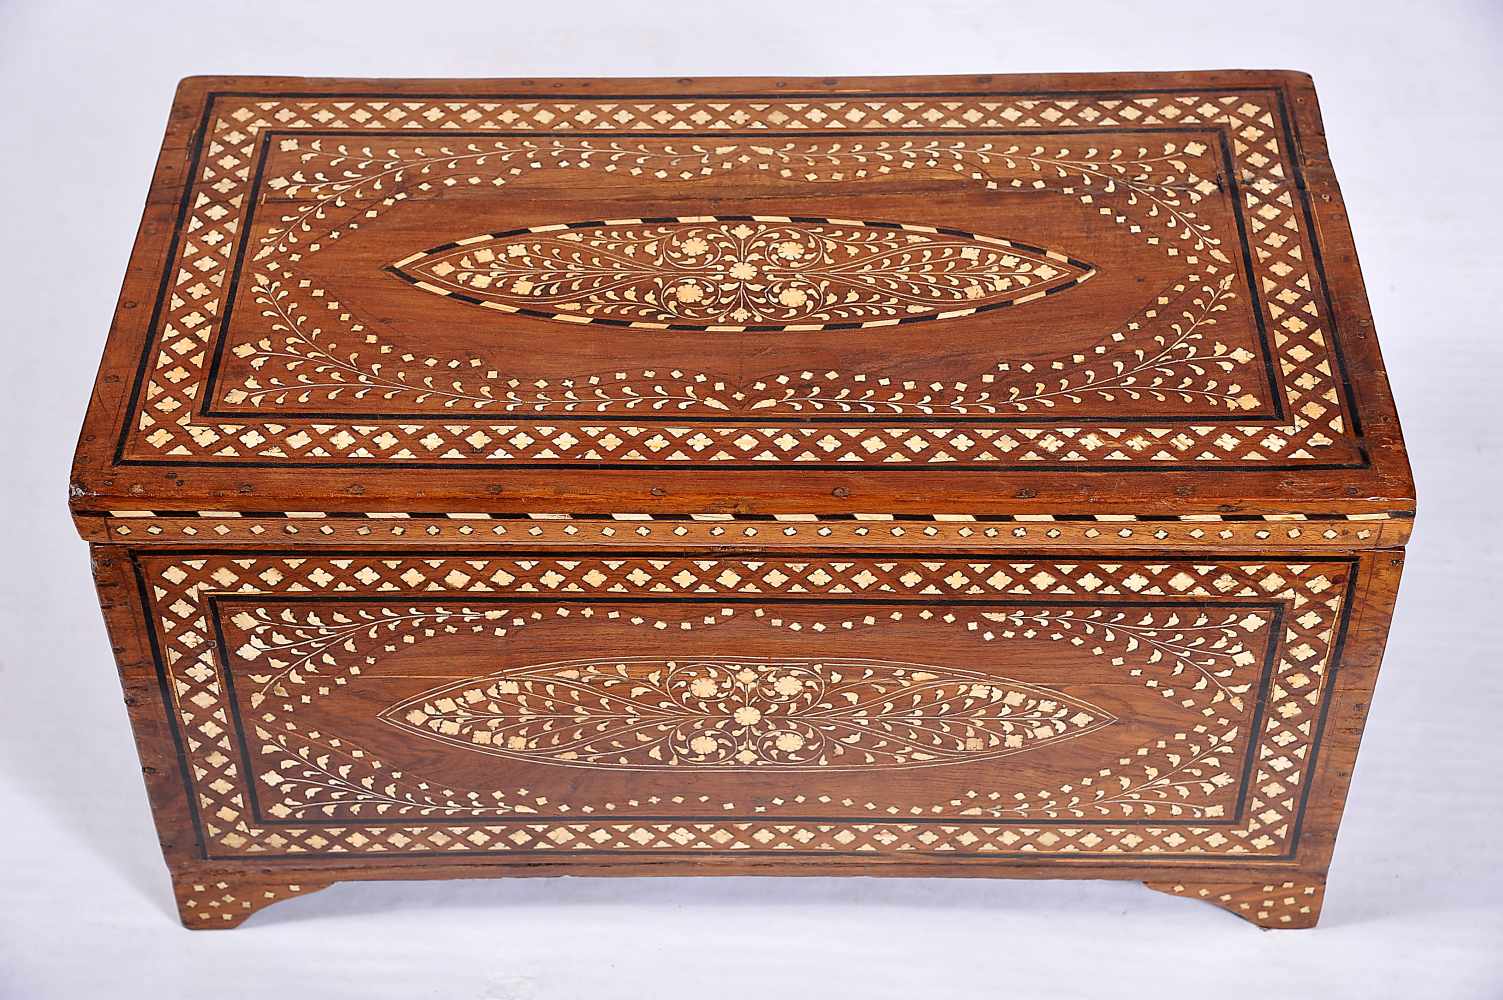 A Small Chest, teak and sissoo, ebony and ivory inlays "Flowers", Indian, 19th C., restoration, Dim. - Image 2 of 2